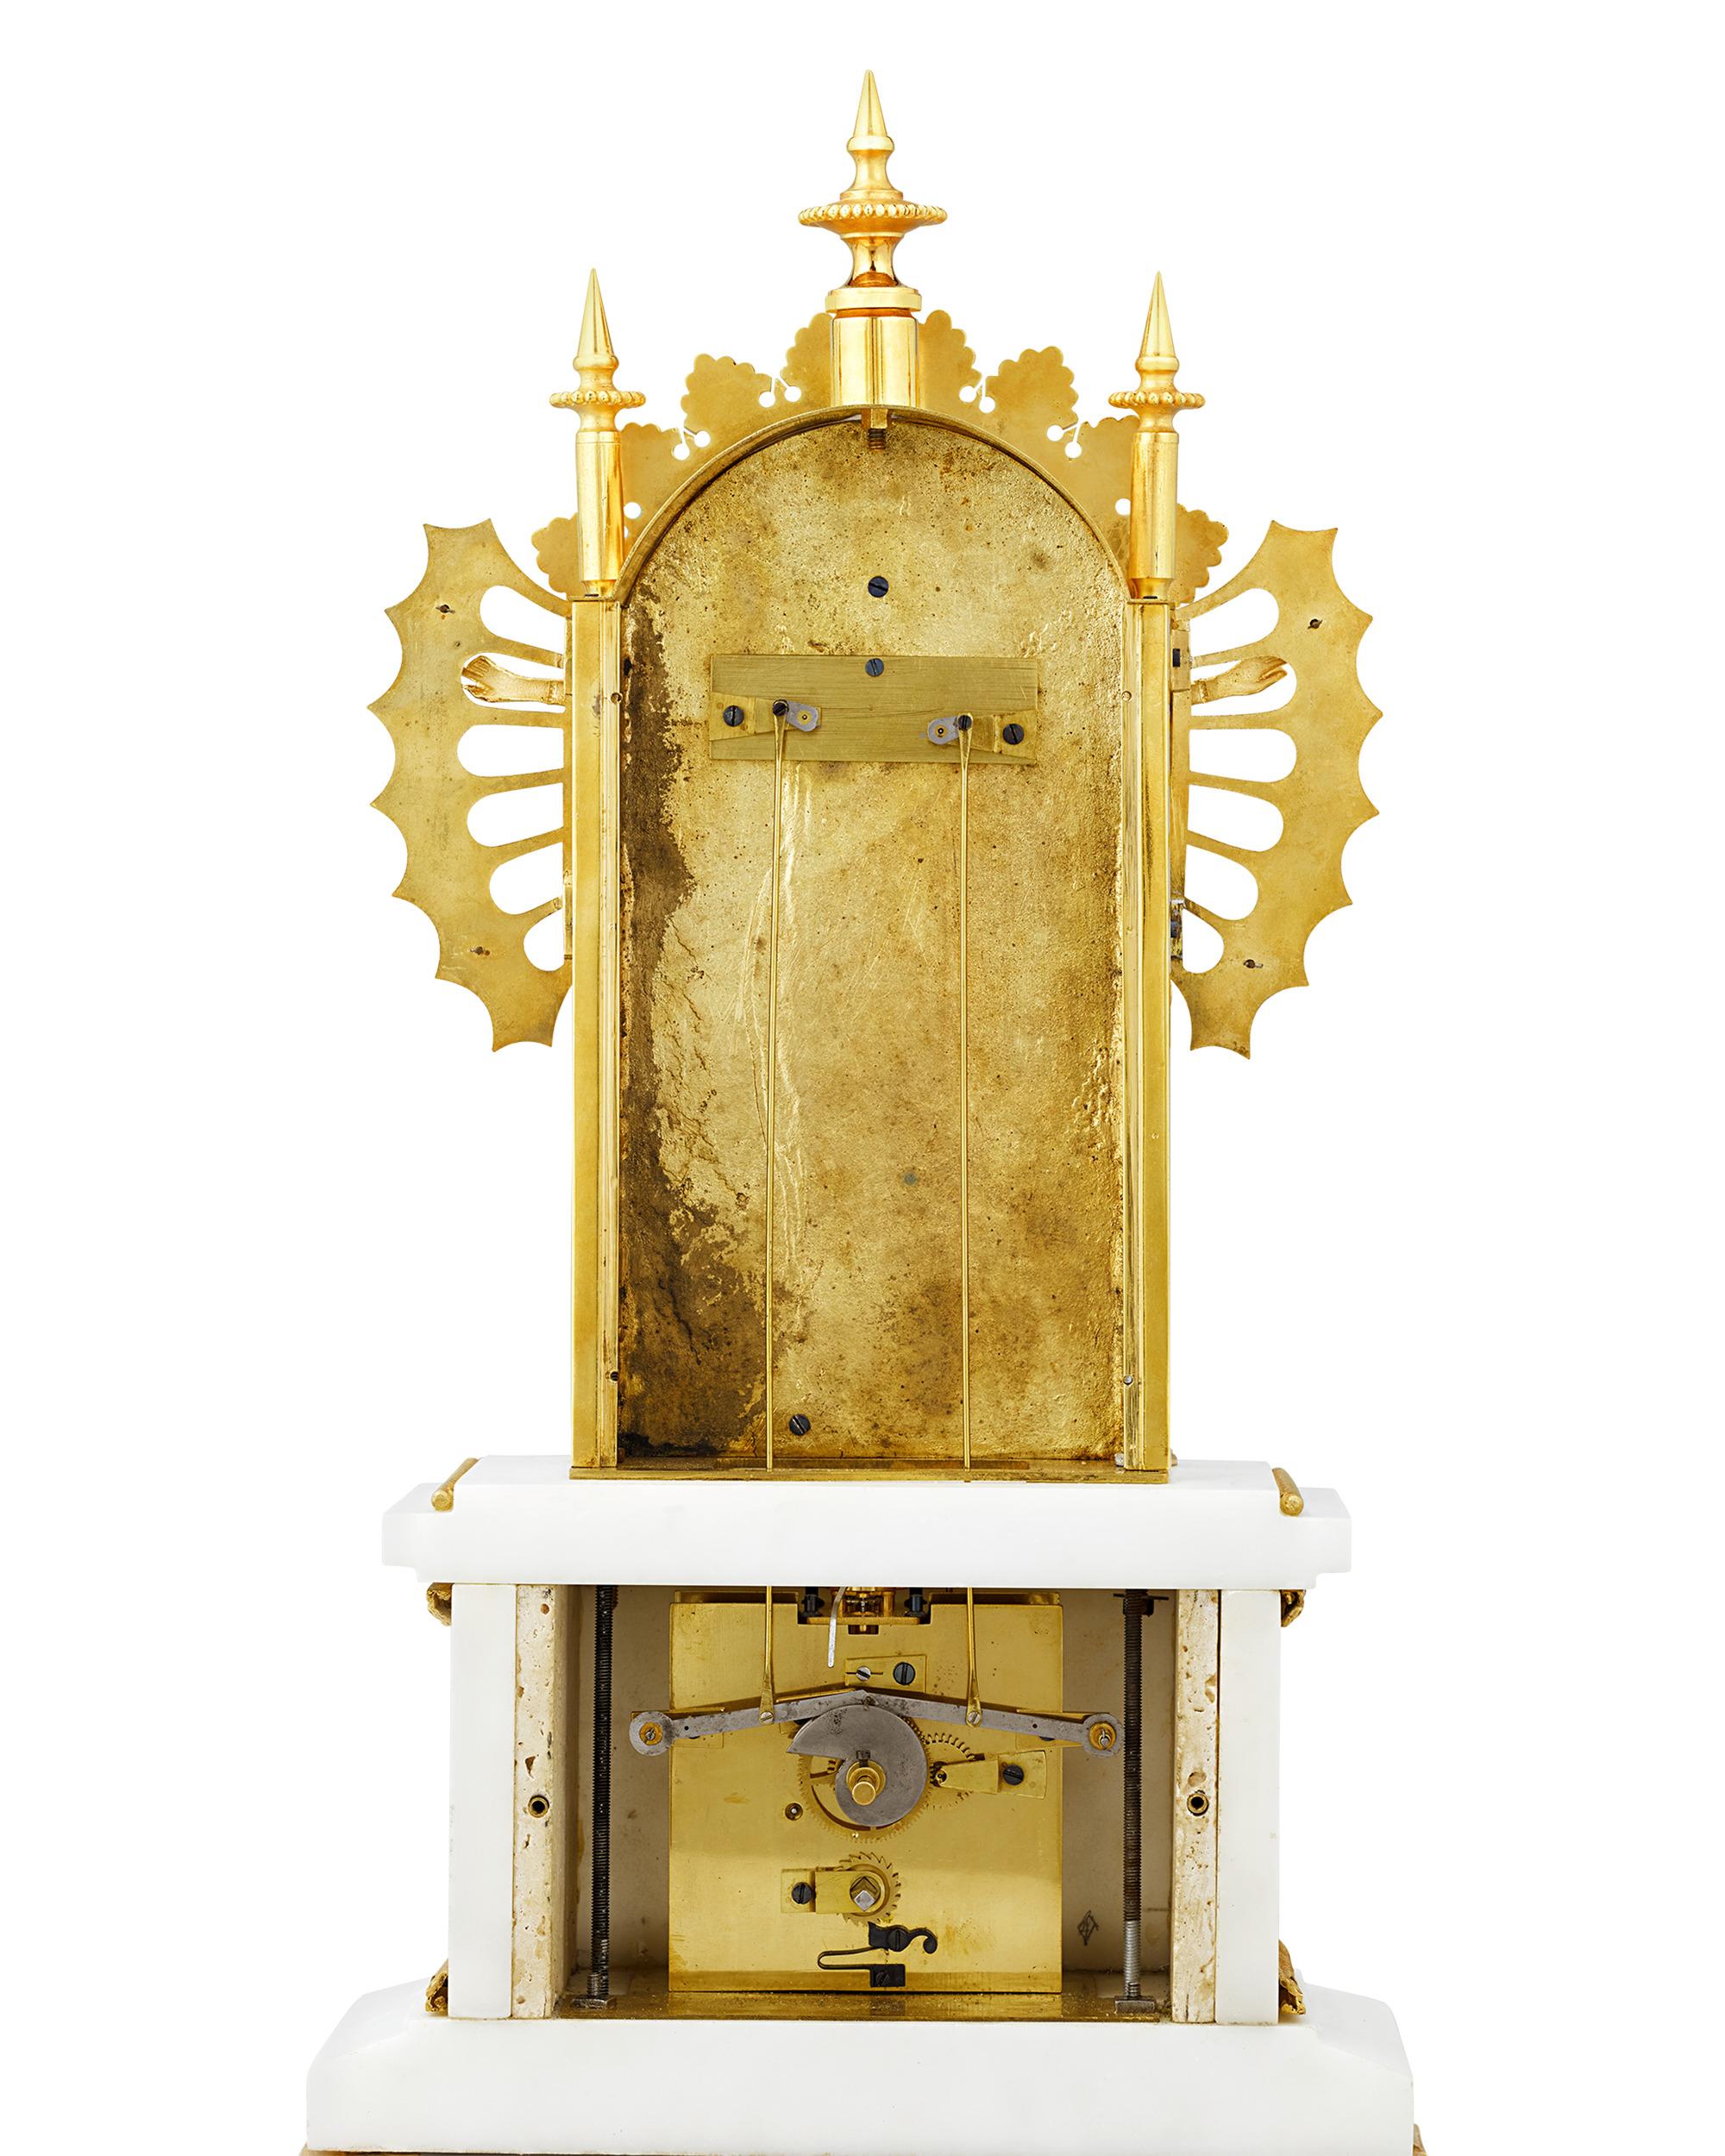 Bras En L'air French Mantel Clock In Excellent Condition For Sale In New Orleans, LA